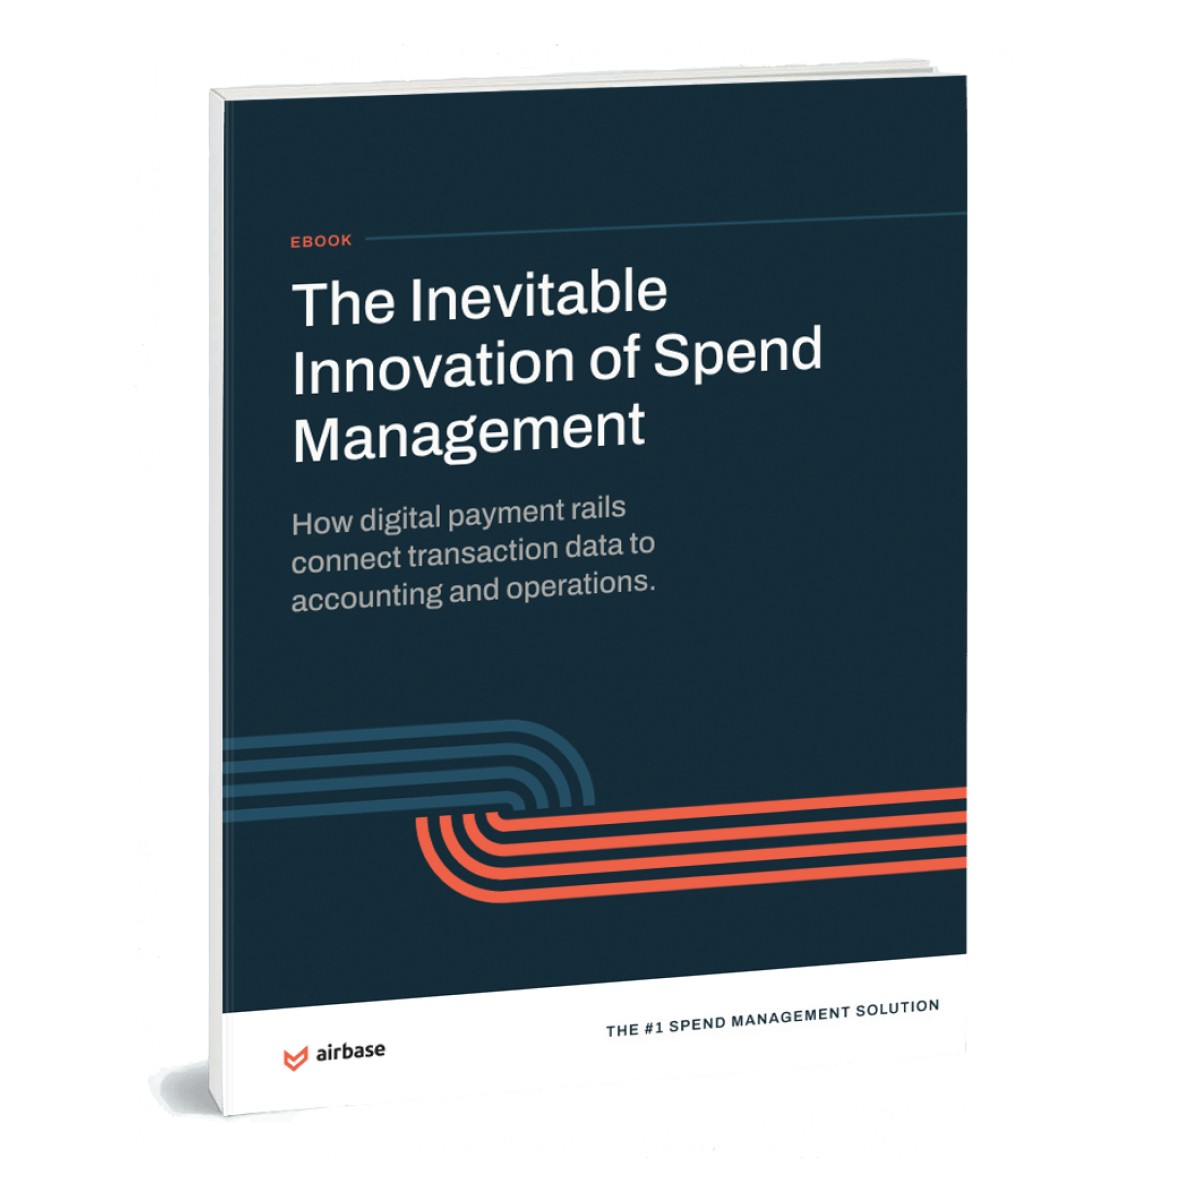 The Inevitable Innovation of Spend Management